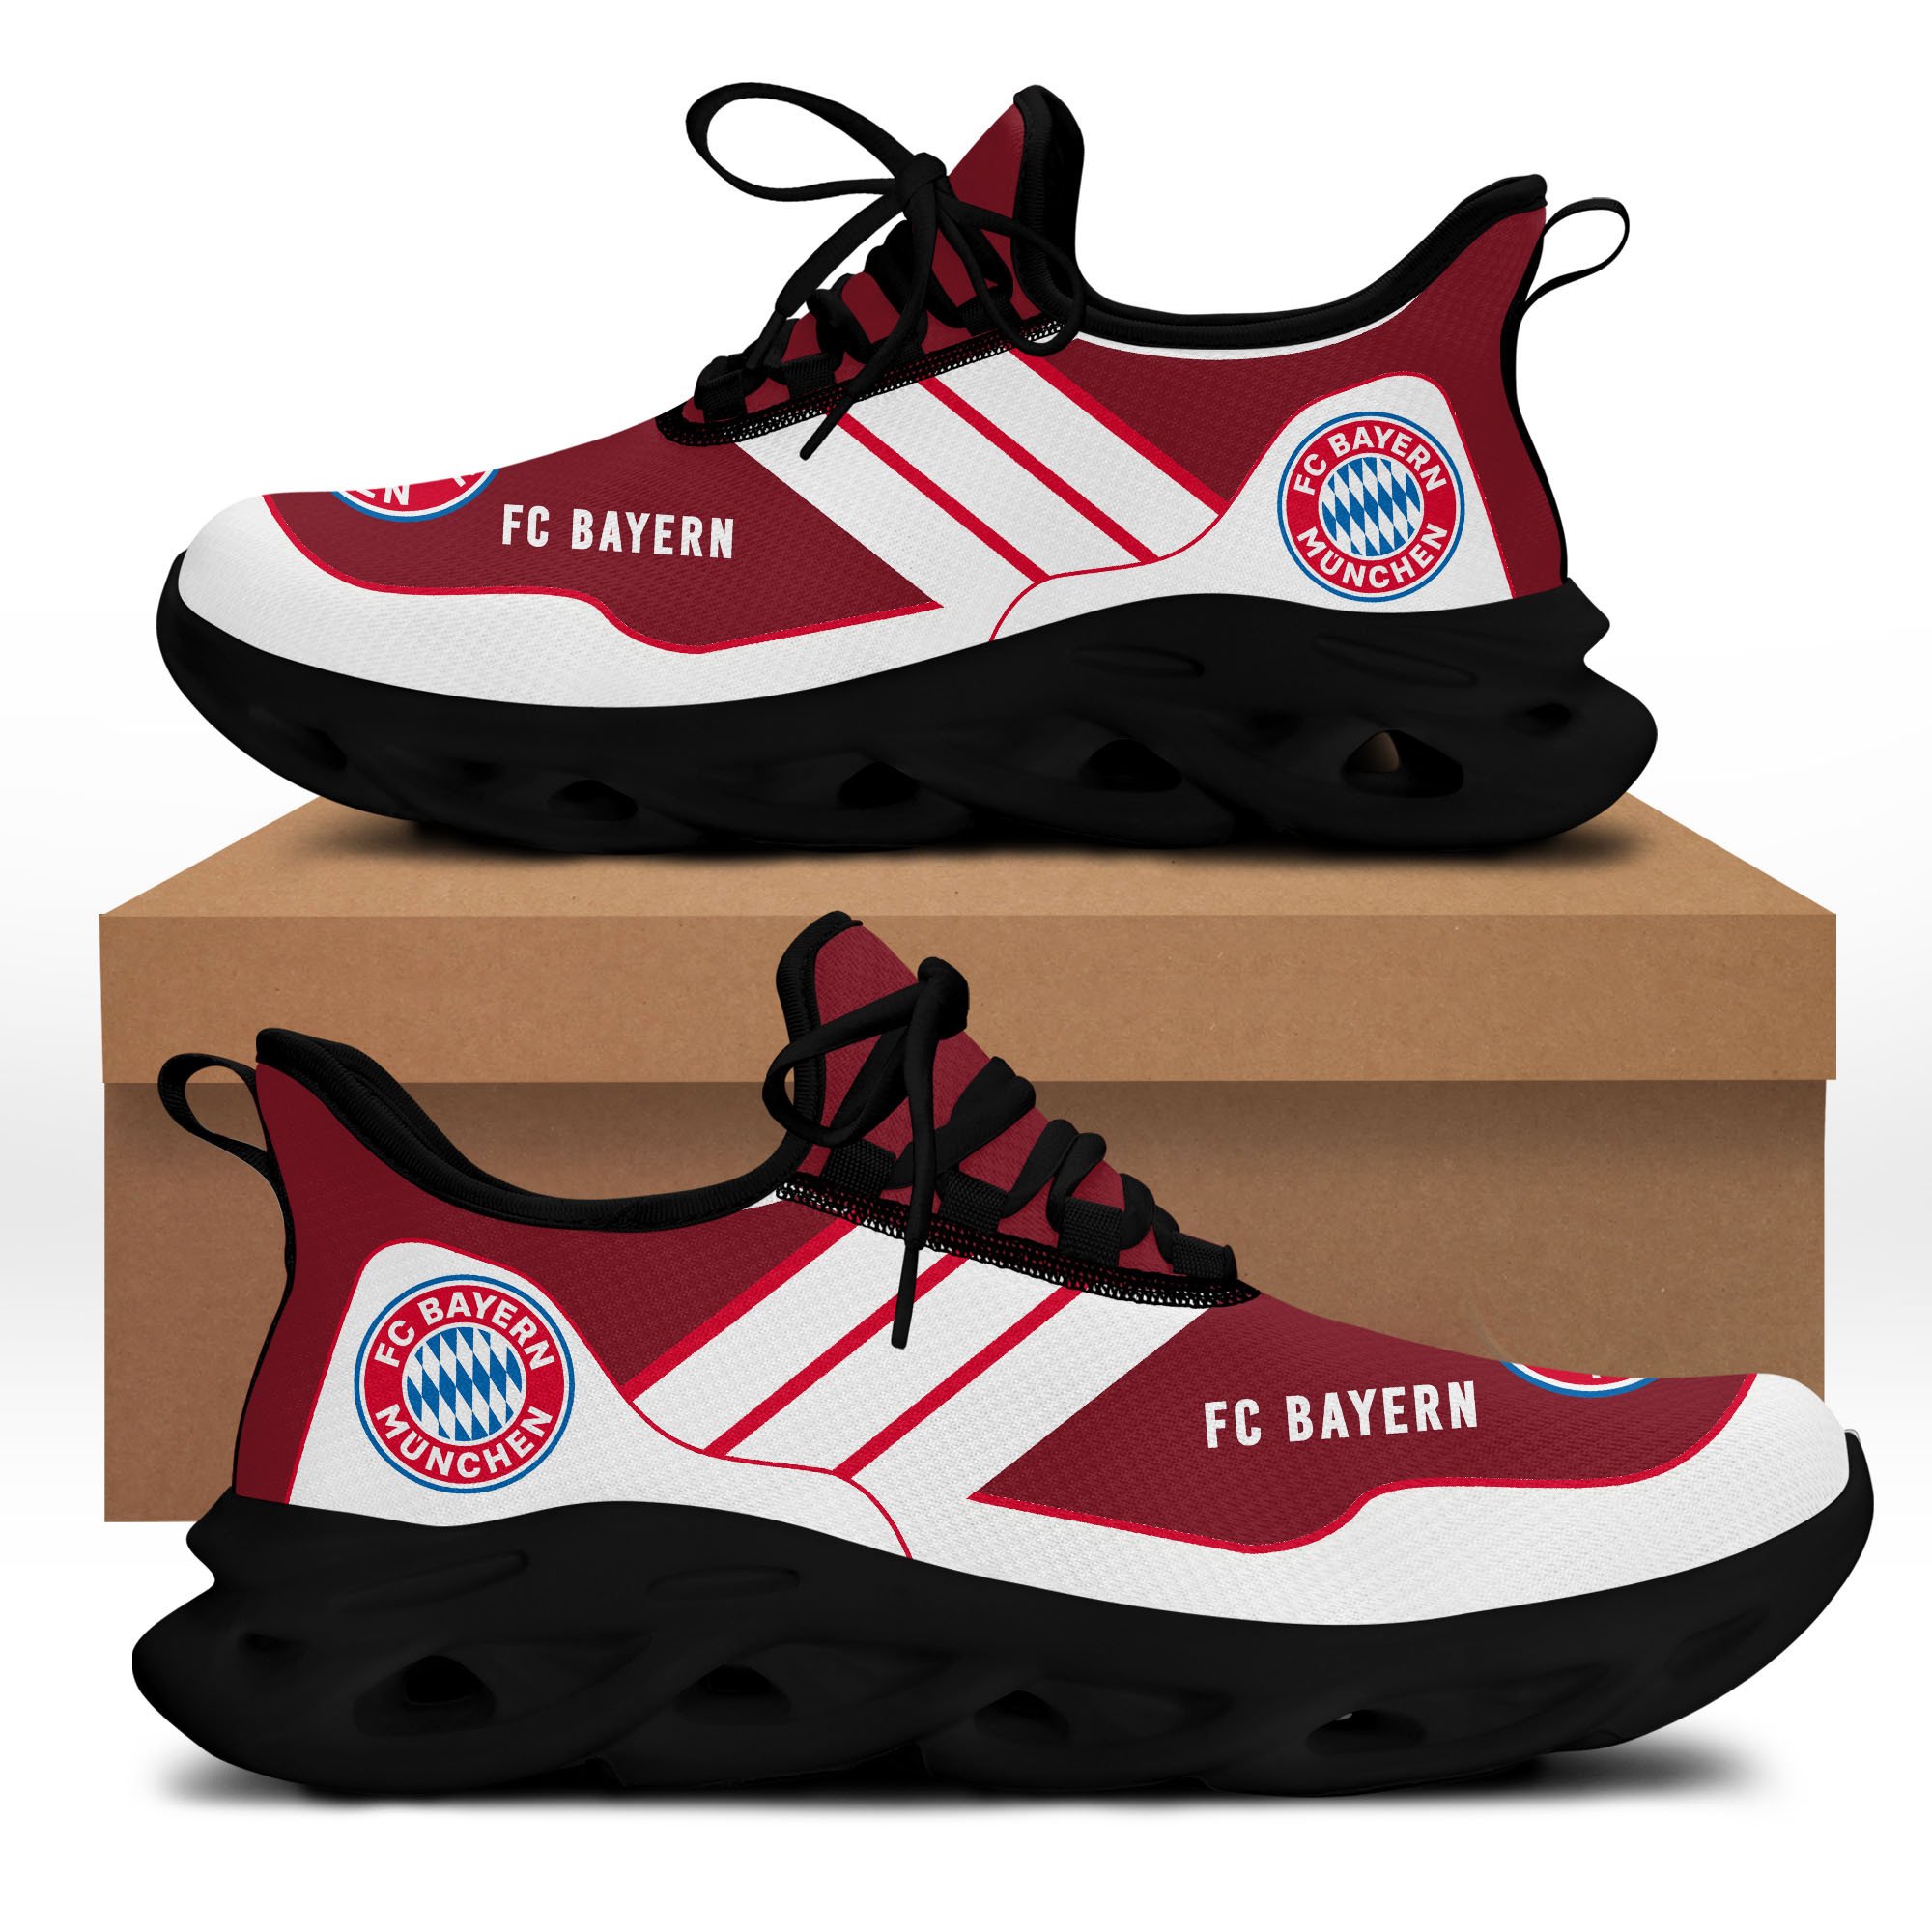 NEW FC Bayern Munich Clunky Max soul Sneakers Shoes